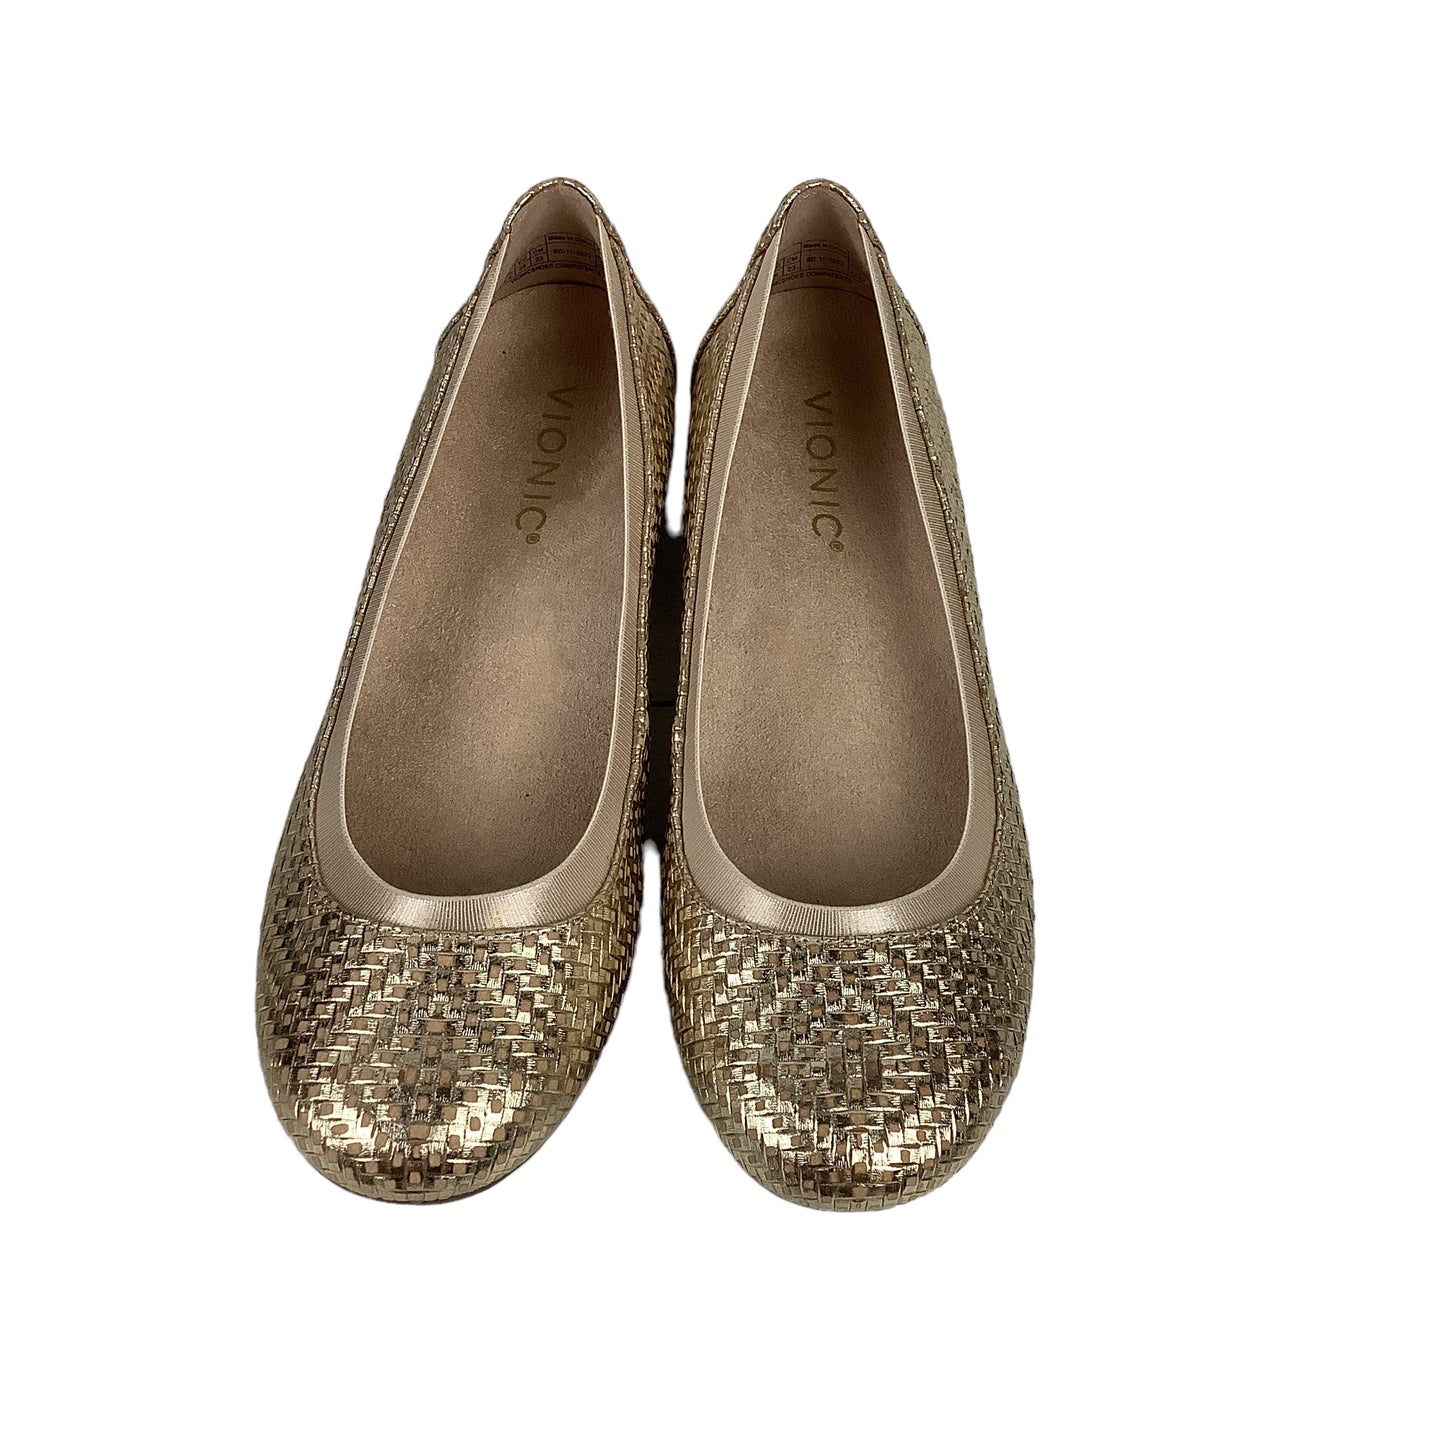 Shoes Flats By Vionic  Size: 6